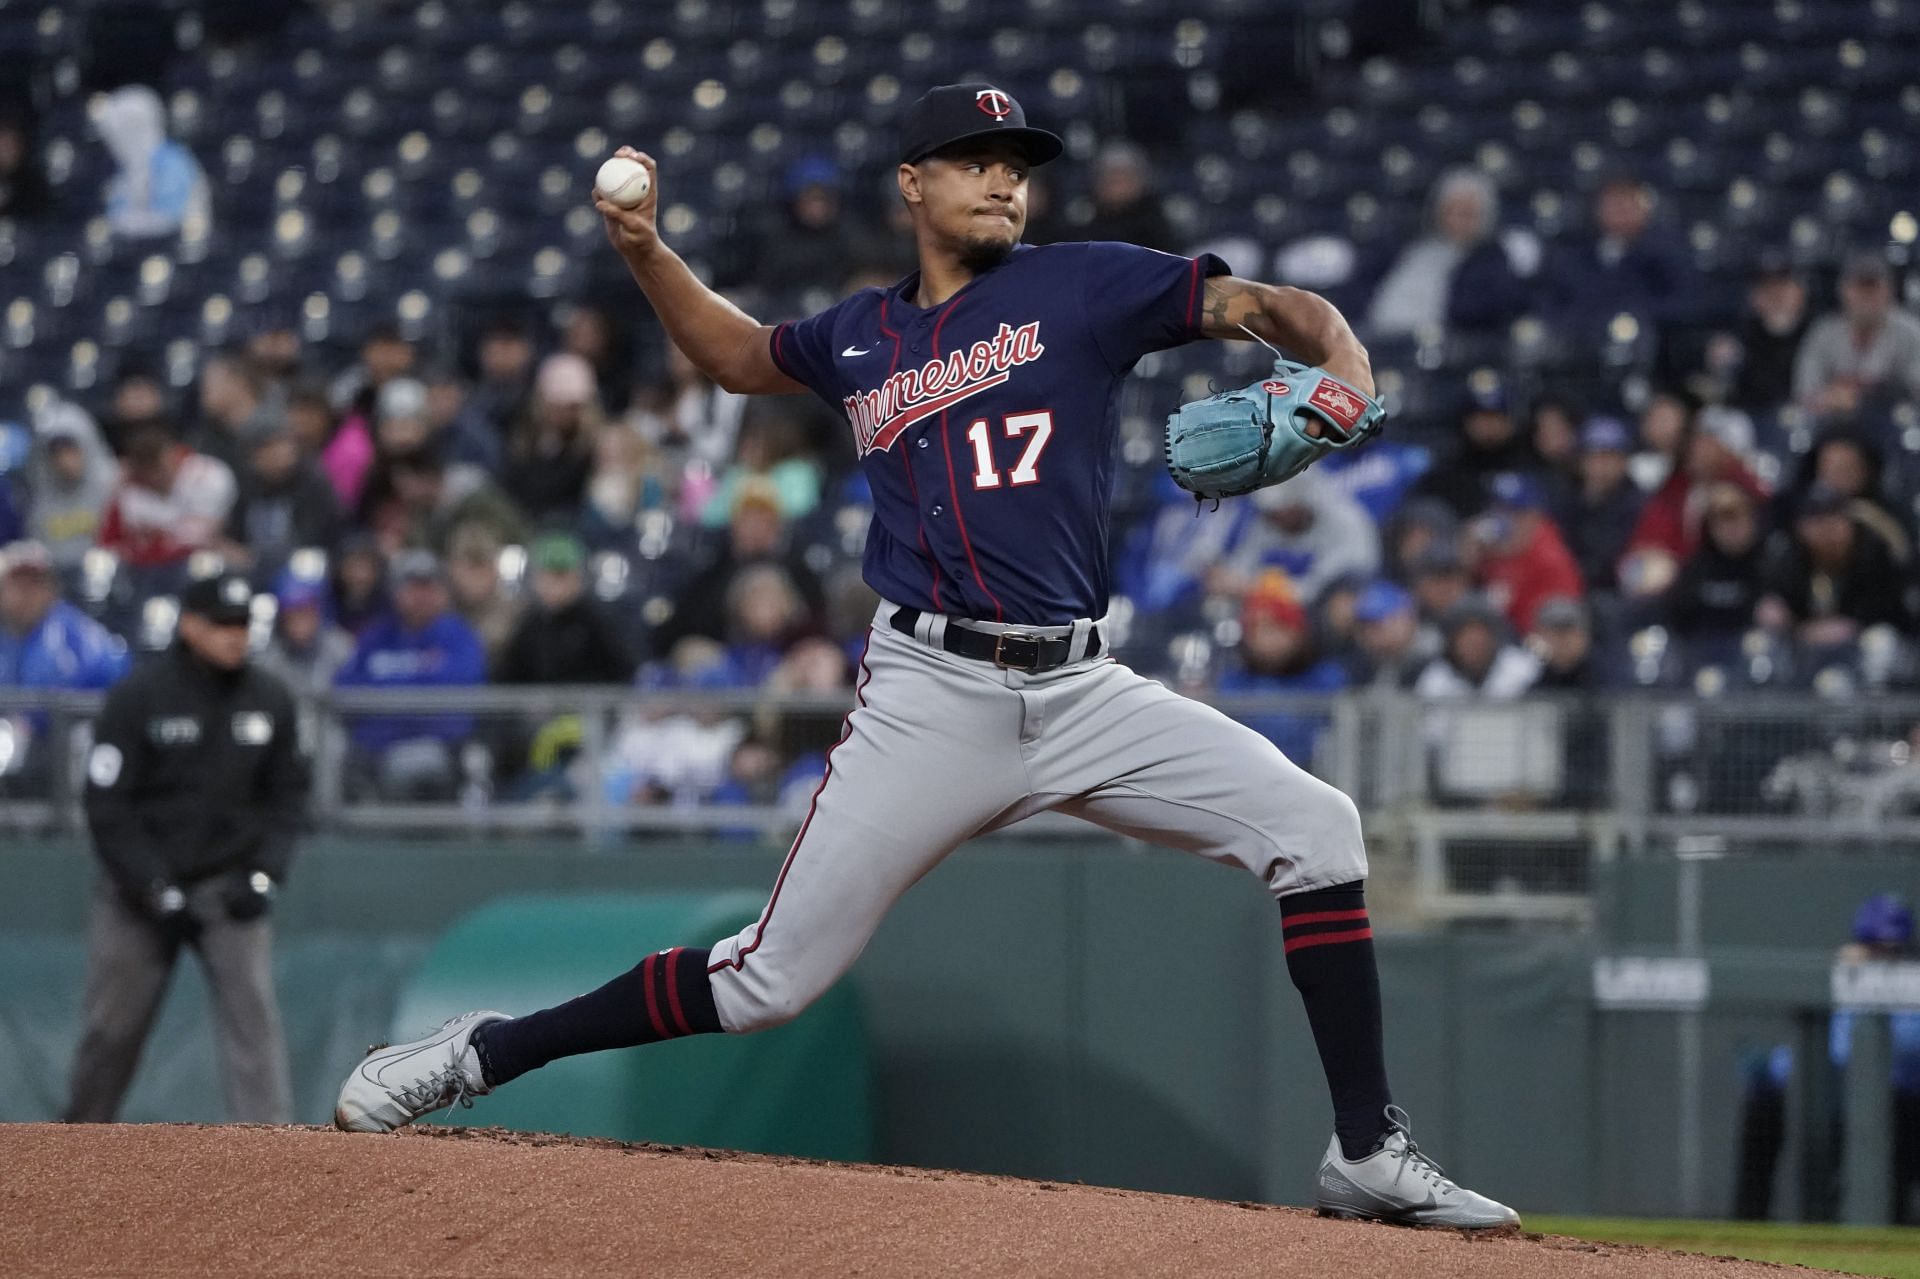 Chris Archer of the Minnesota Twins pitches in the first inning against the Kansas City Royals.